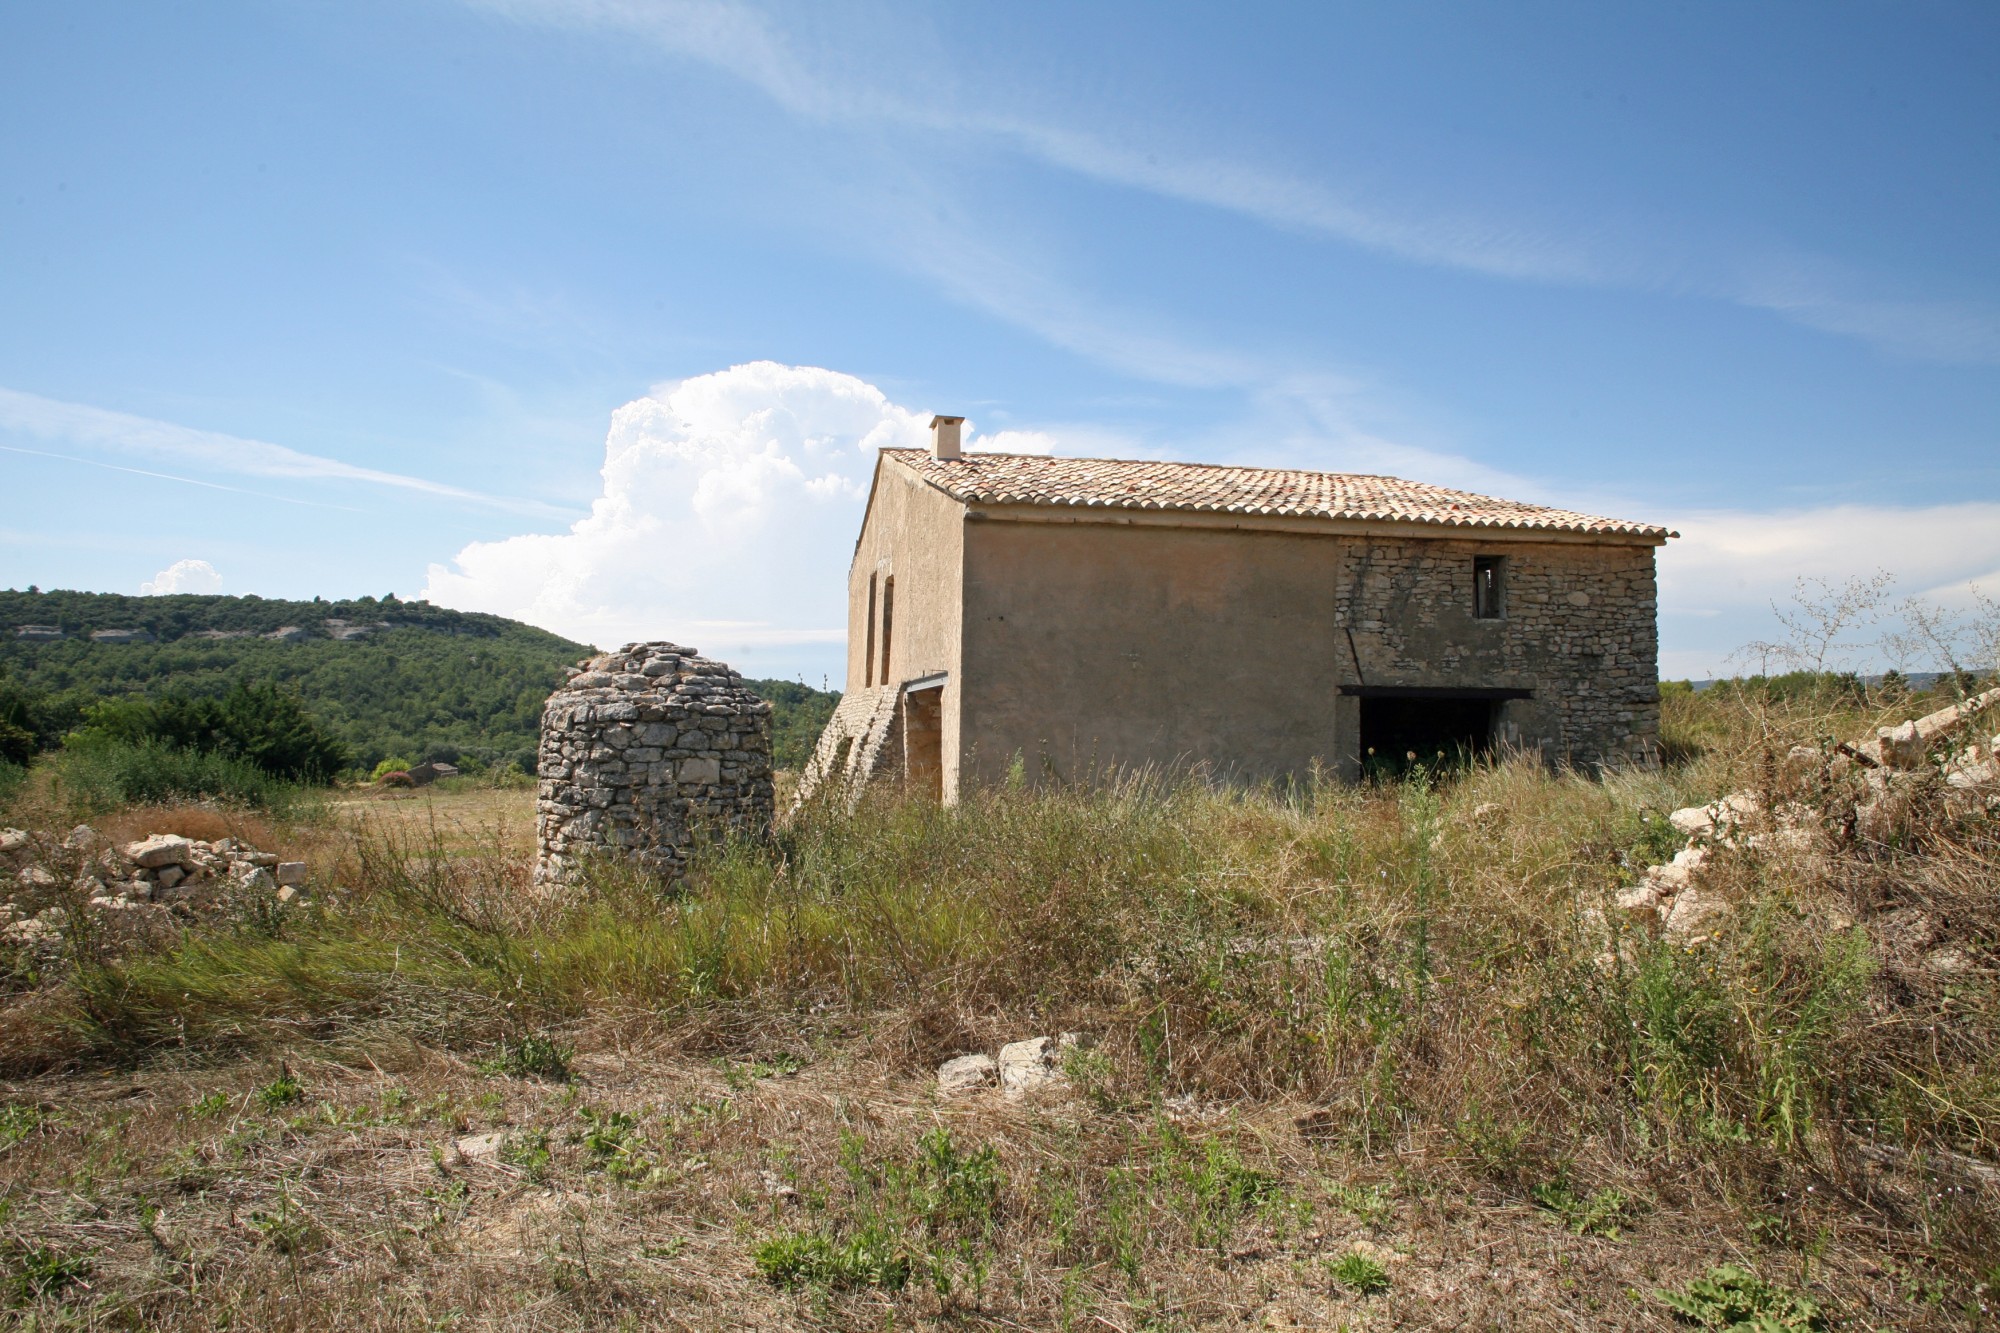 Near Gordes, renovation project on over 2 hectares of land